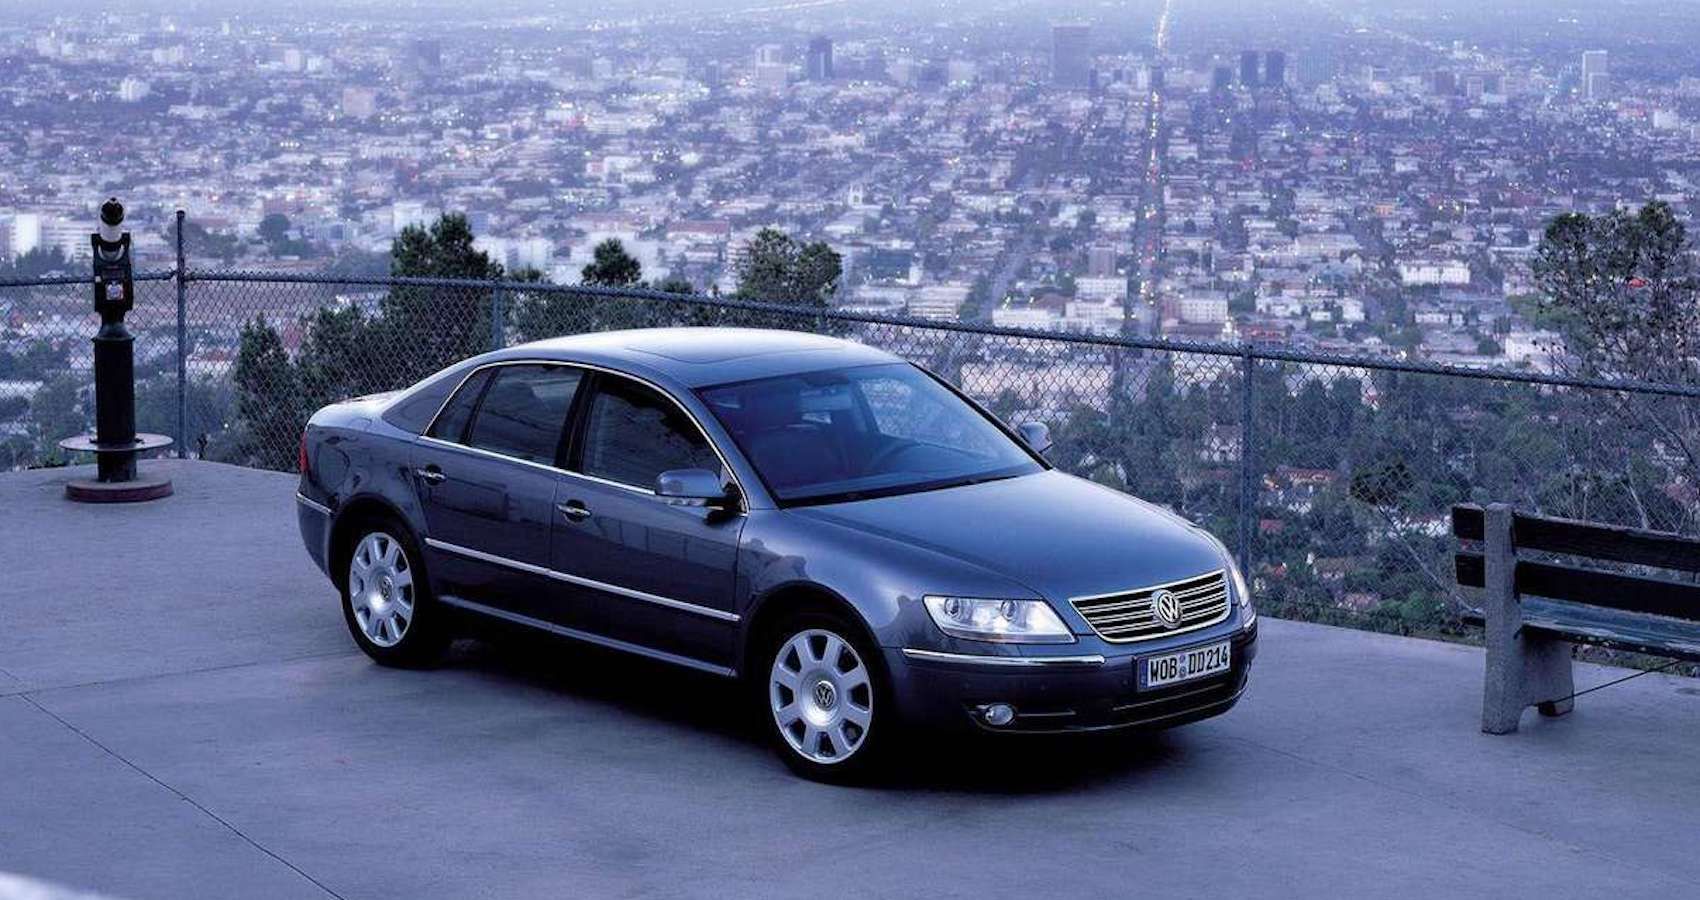 Volkswagen Phaeton 2002 side on over panoramic city view